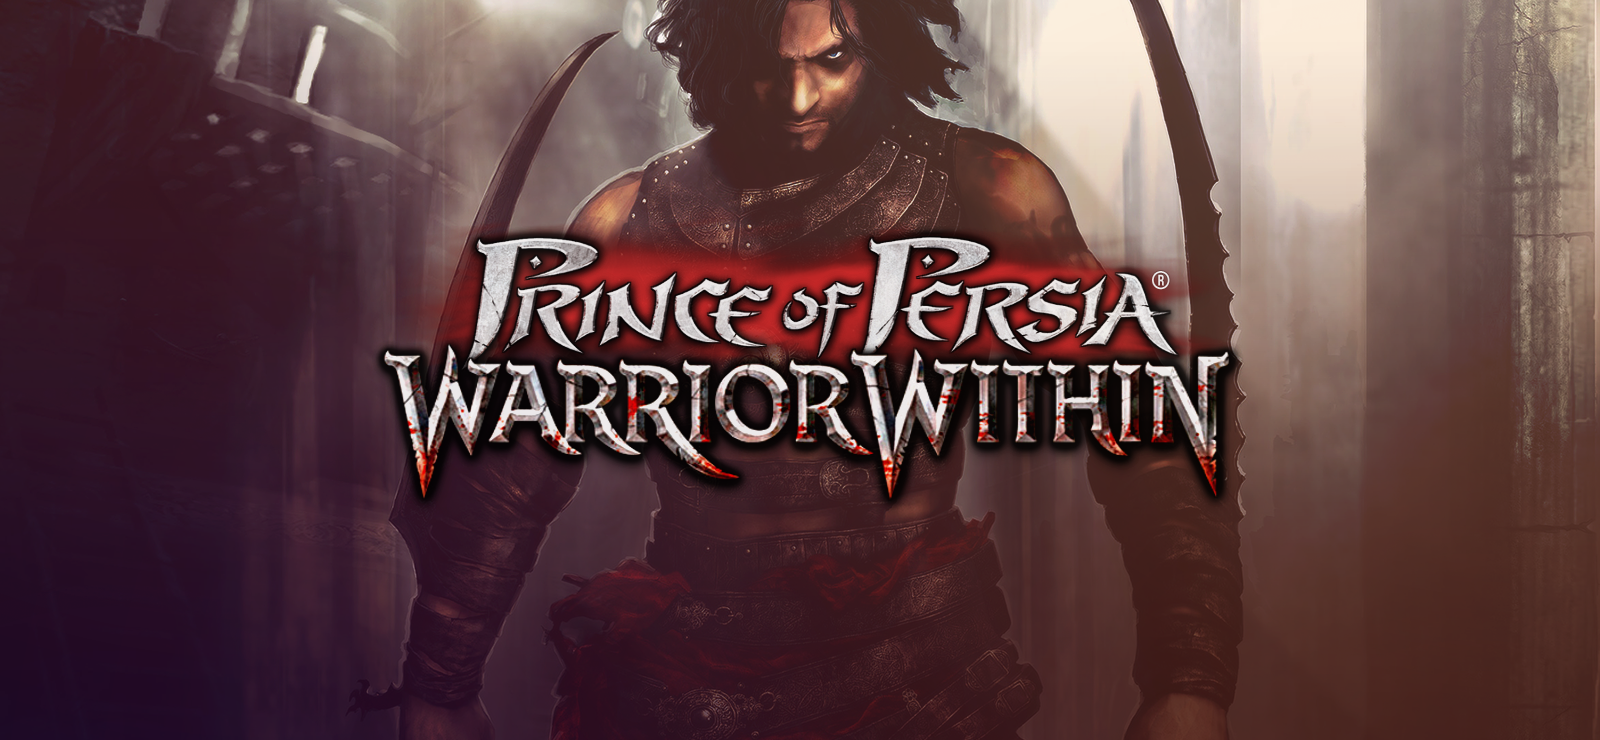 BESTSELLER - Prince Of Persia: Warrior Within